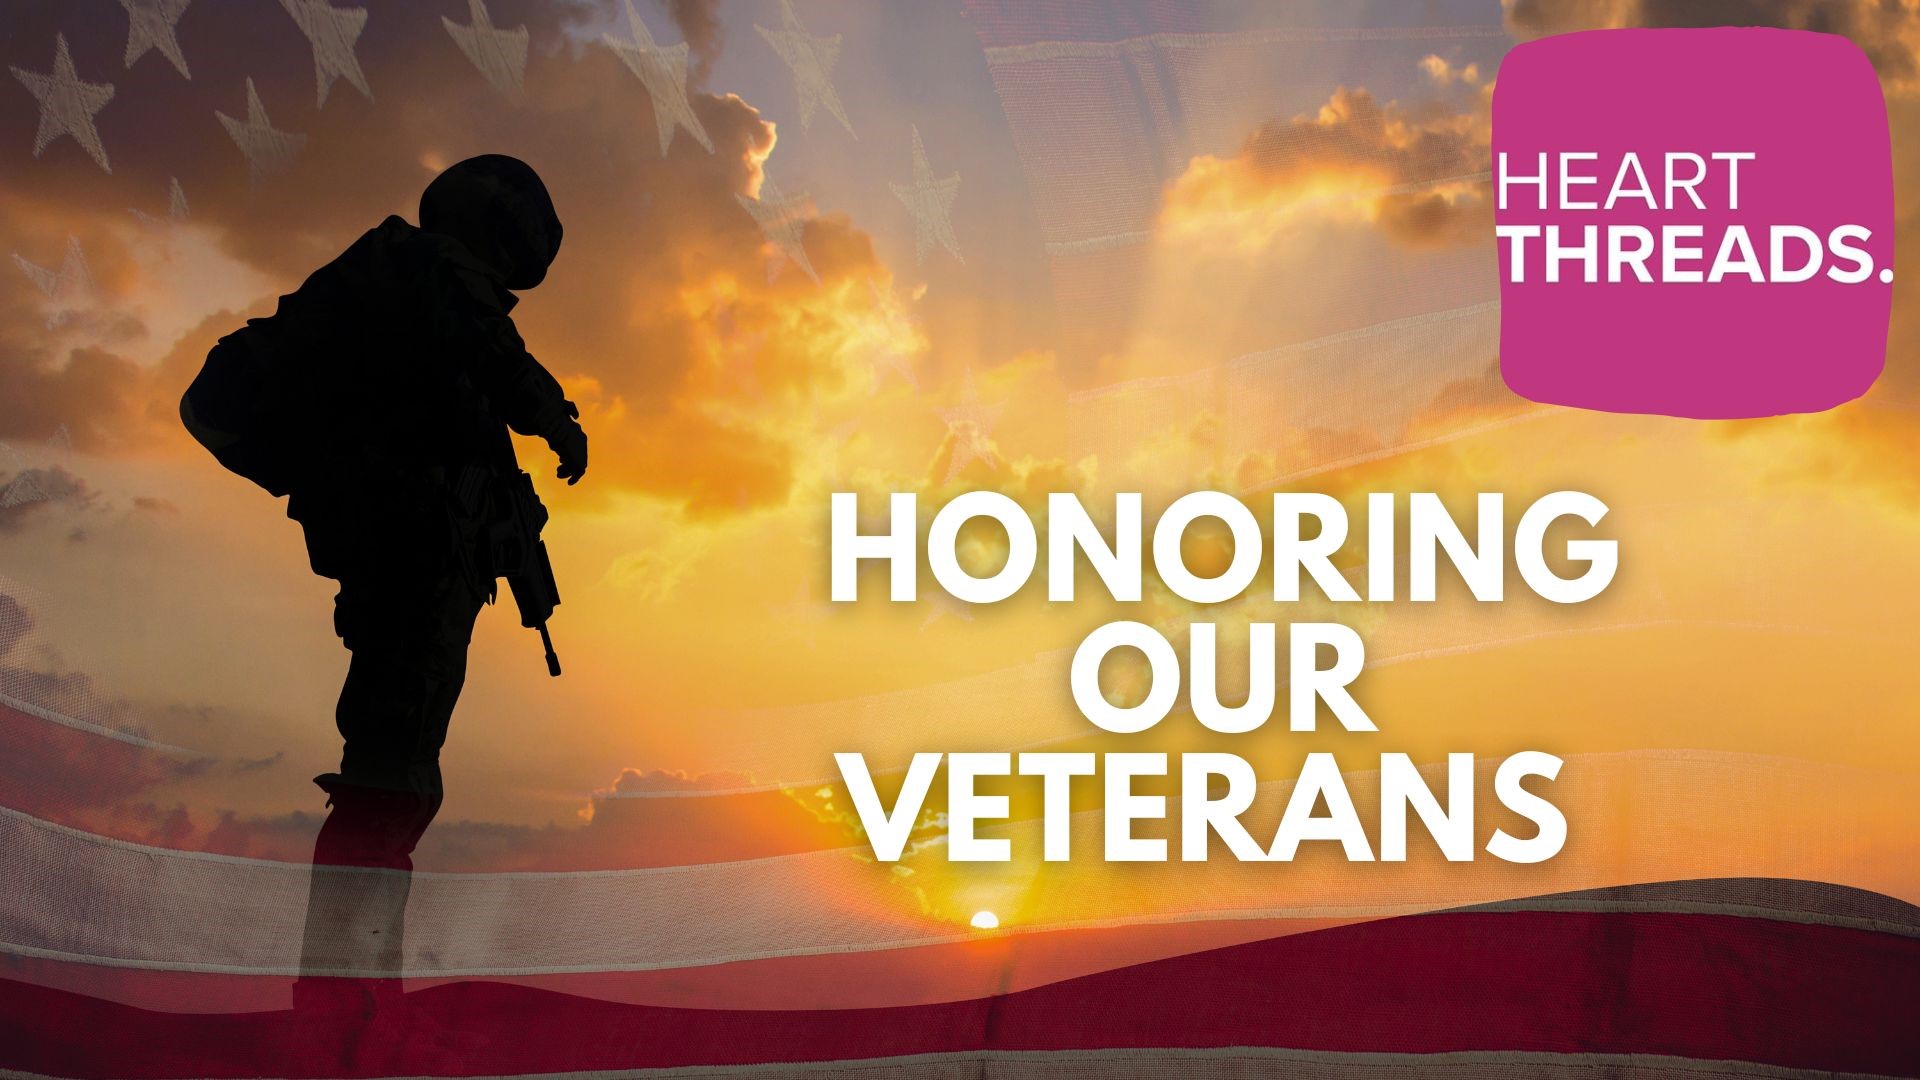 Stories honoring veterans for their service to the country, as well as how they continue to serve others now. Plus ways they are celebrated in their communities.